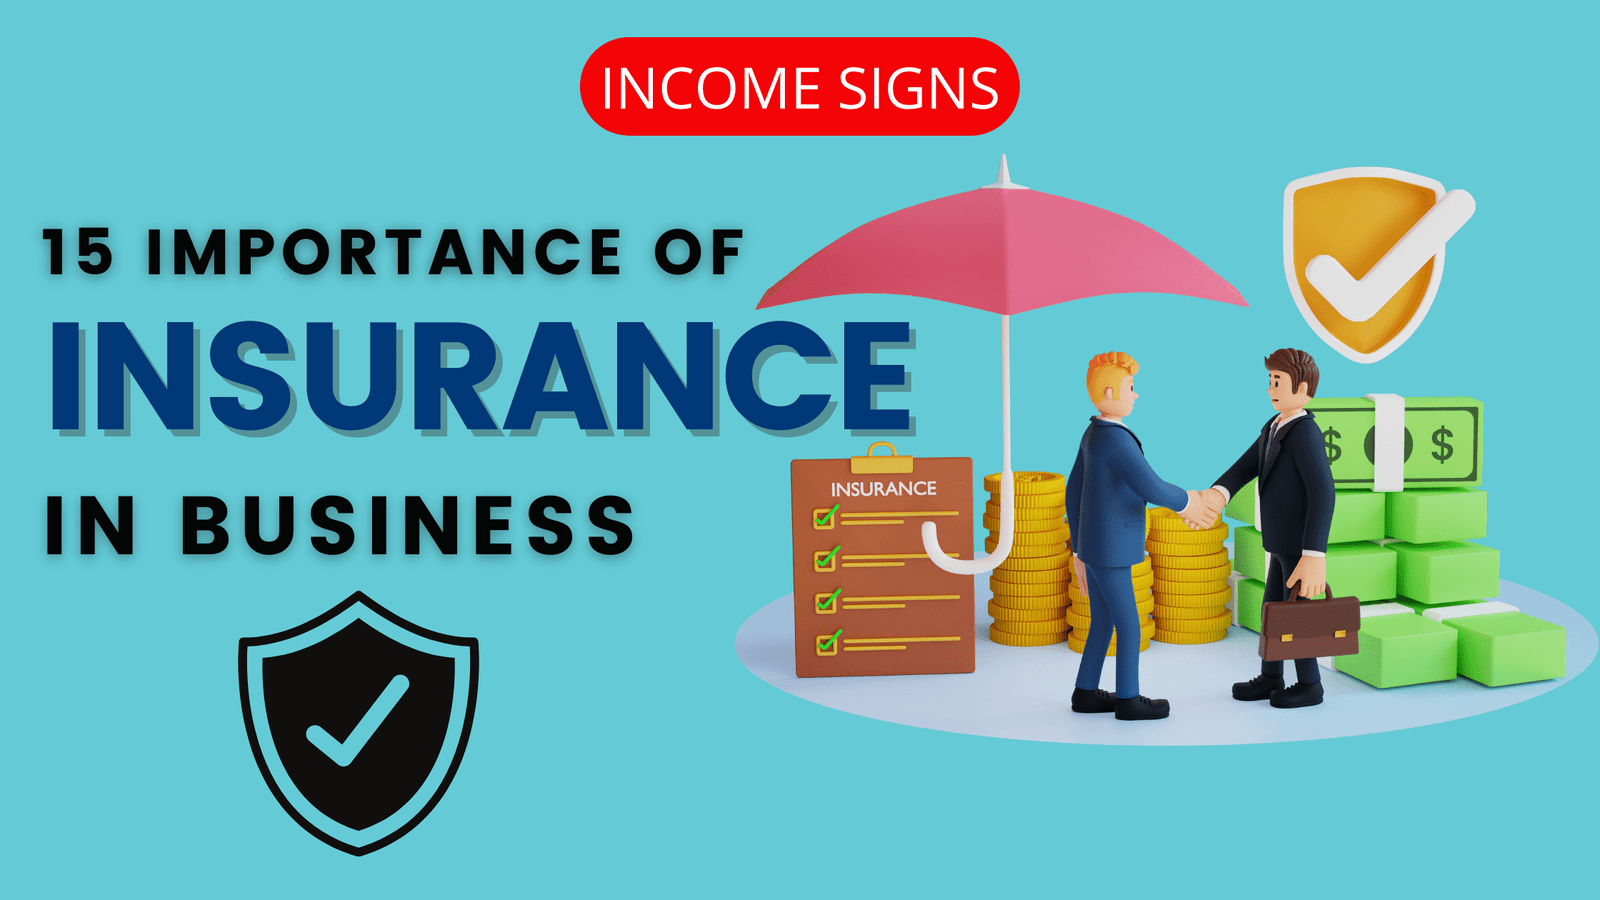 Importance of Insurance in Business - Income Signs